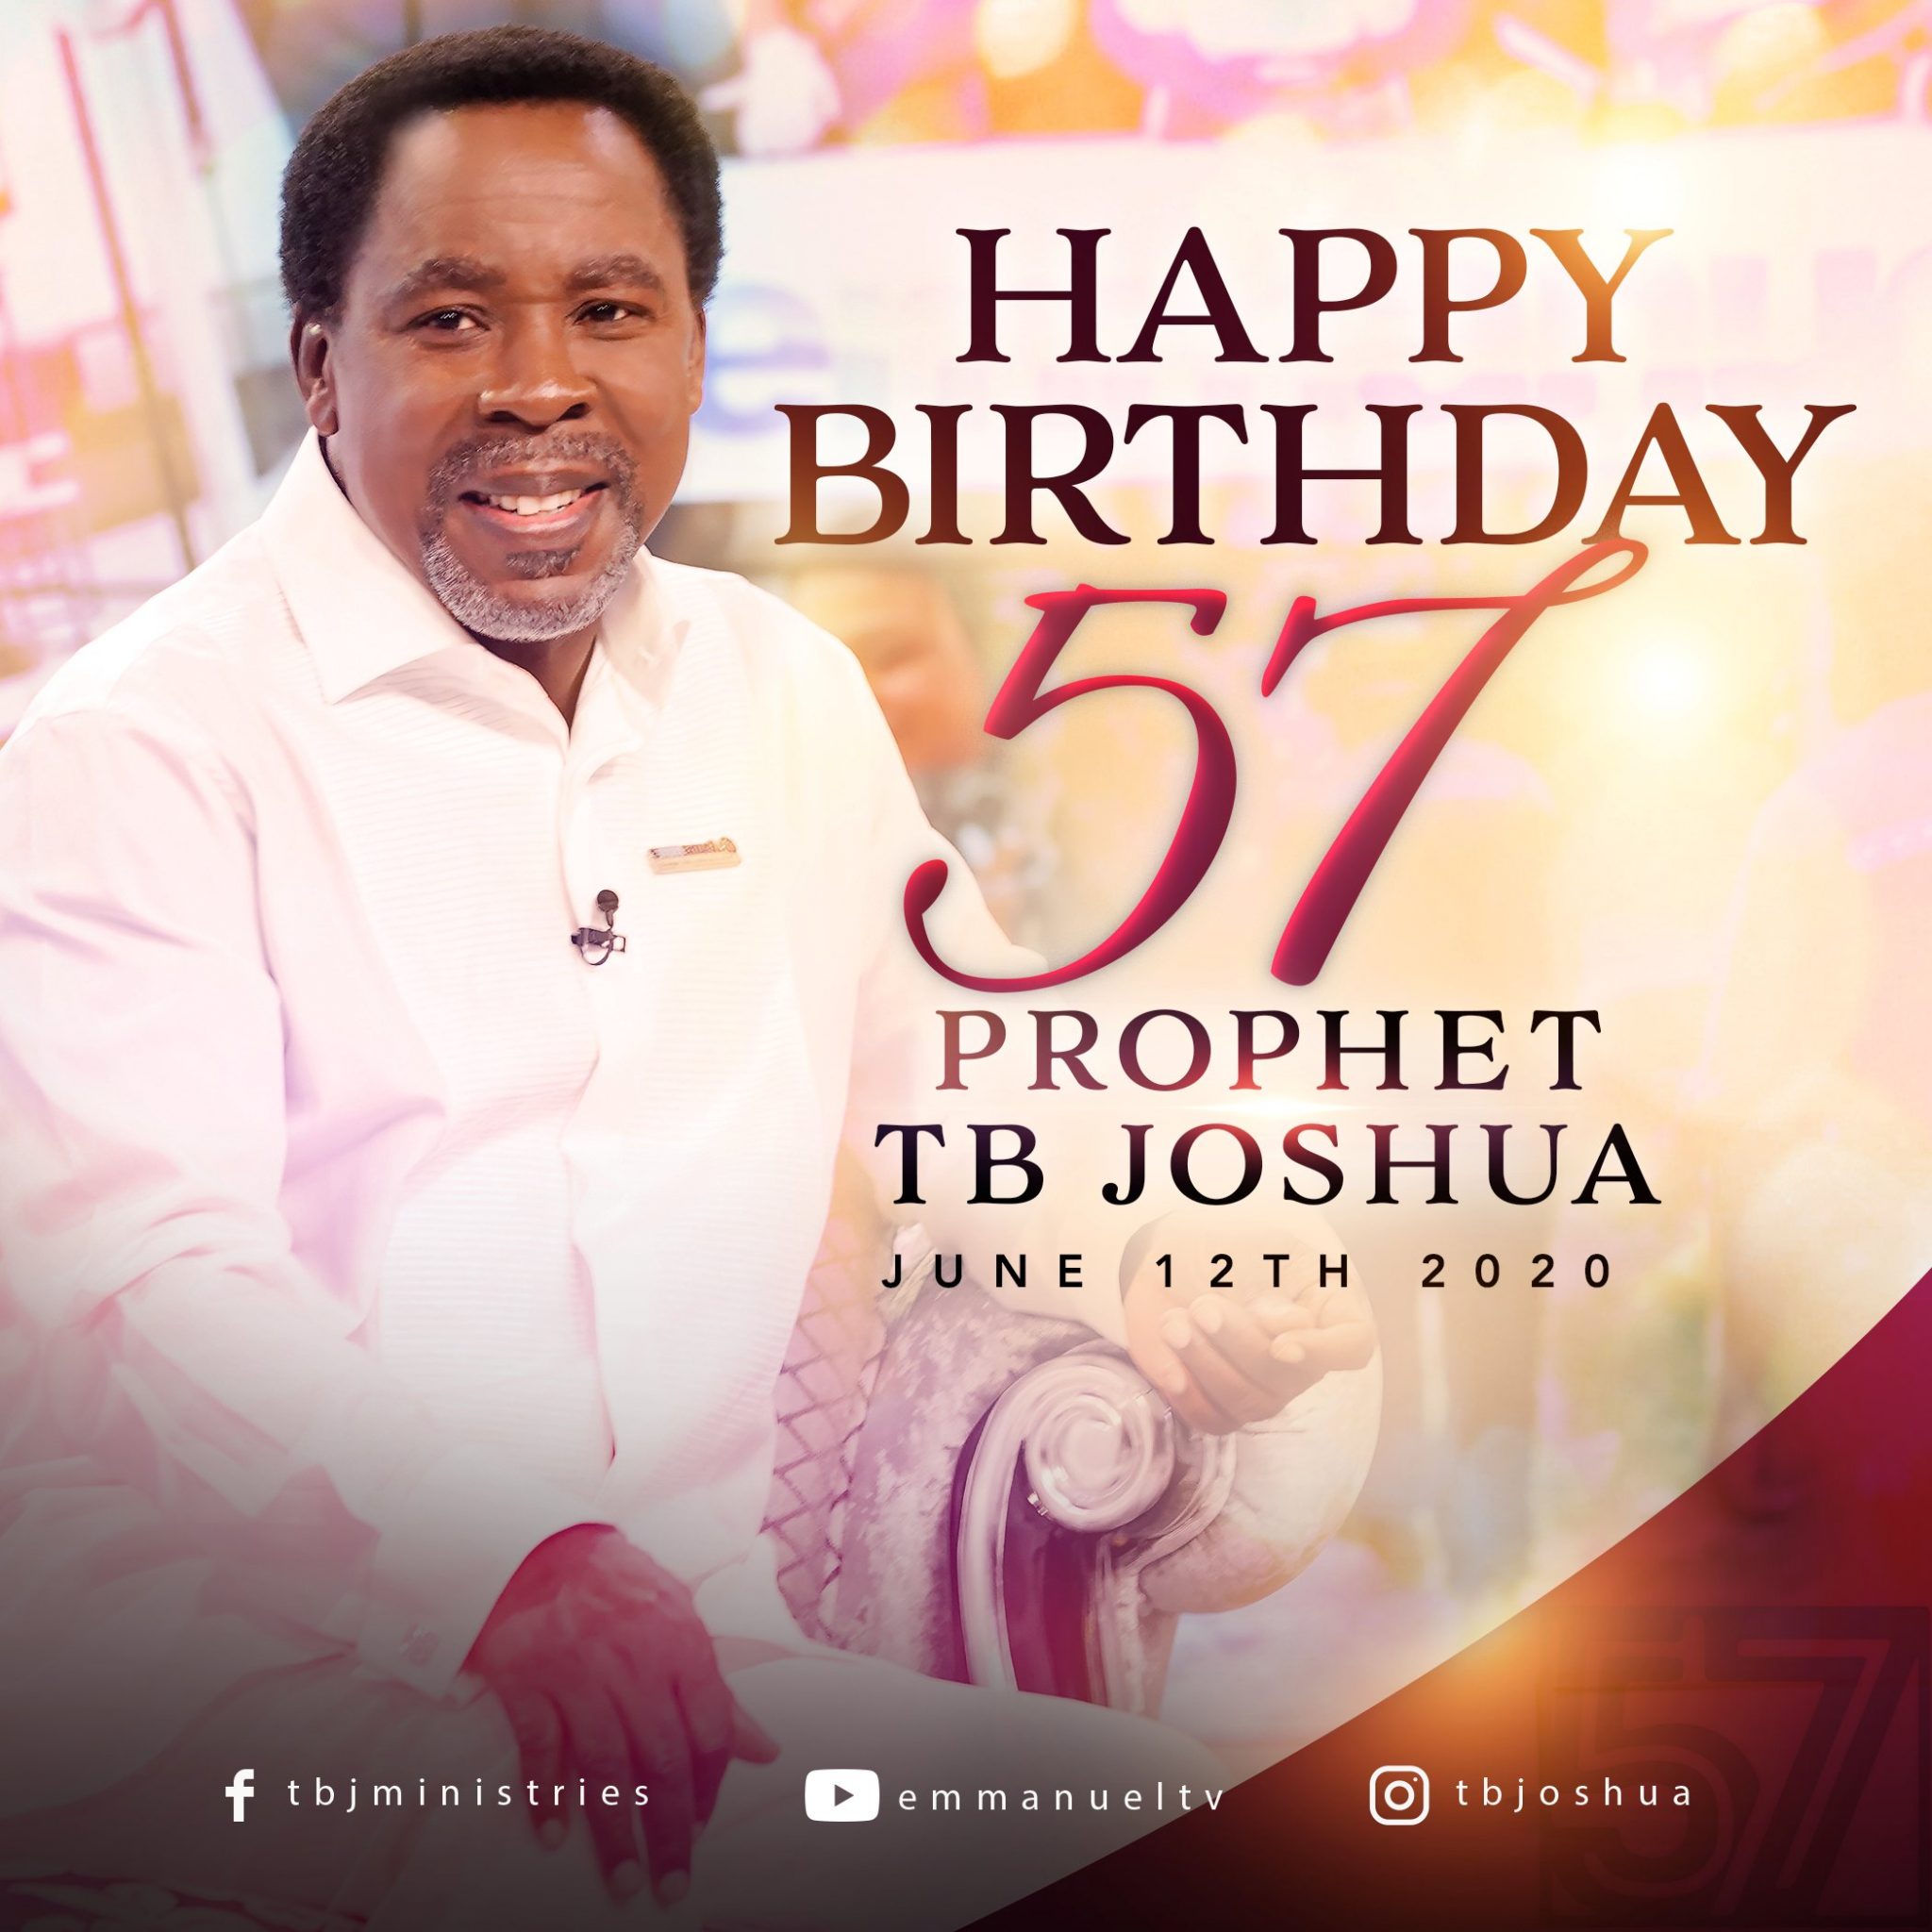 See How Prophet TB Joshua celebrated His 57th birthday With Love  (+Video)